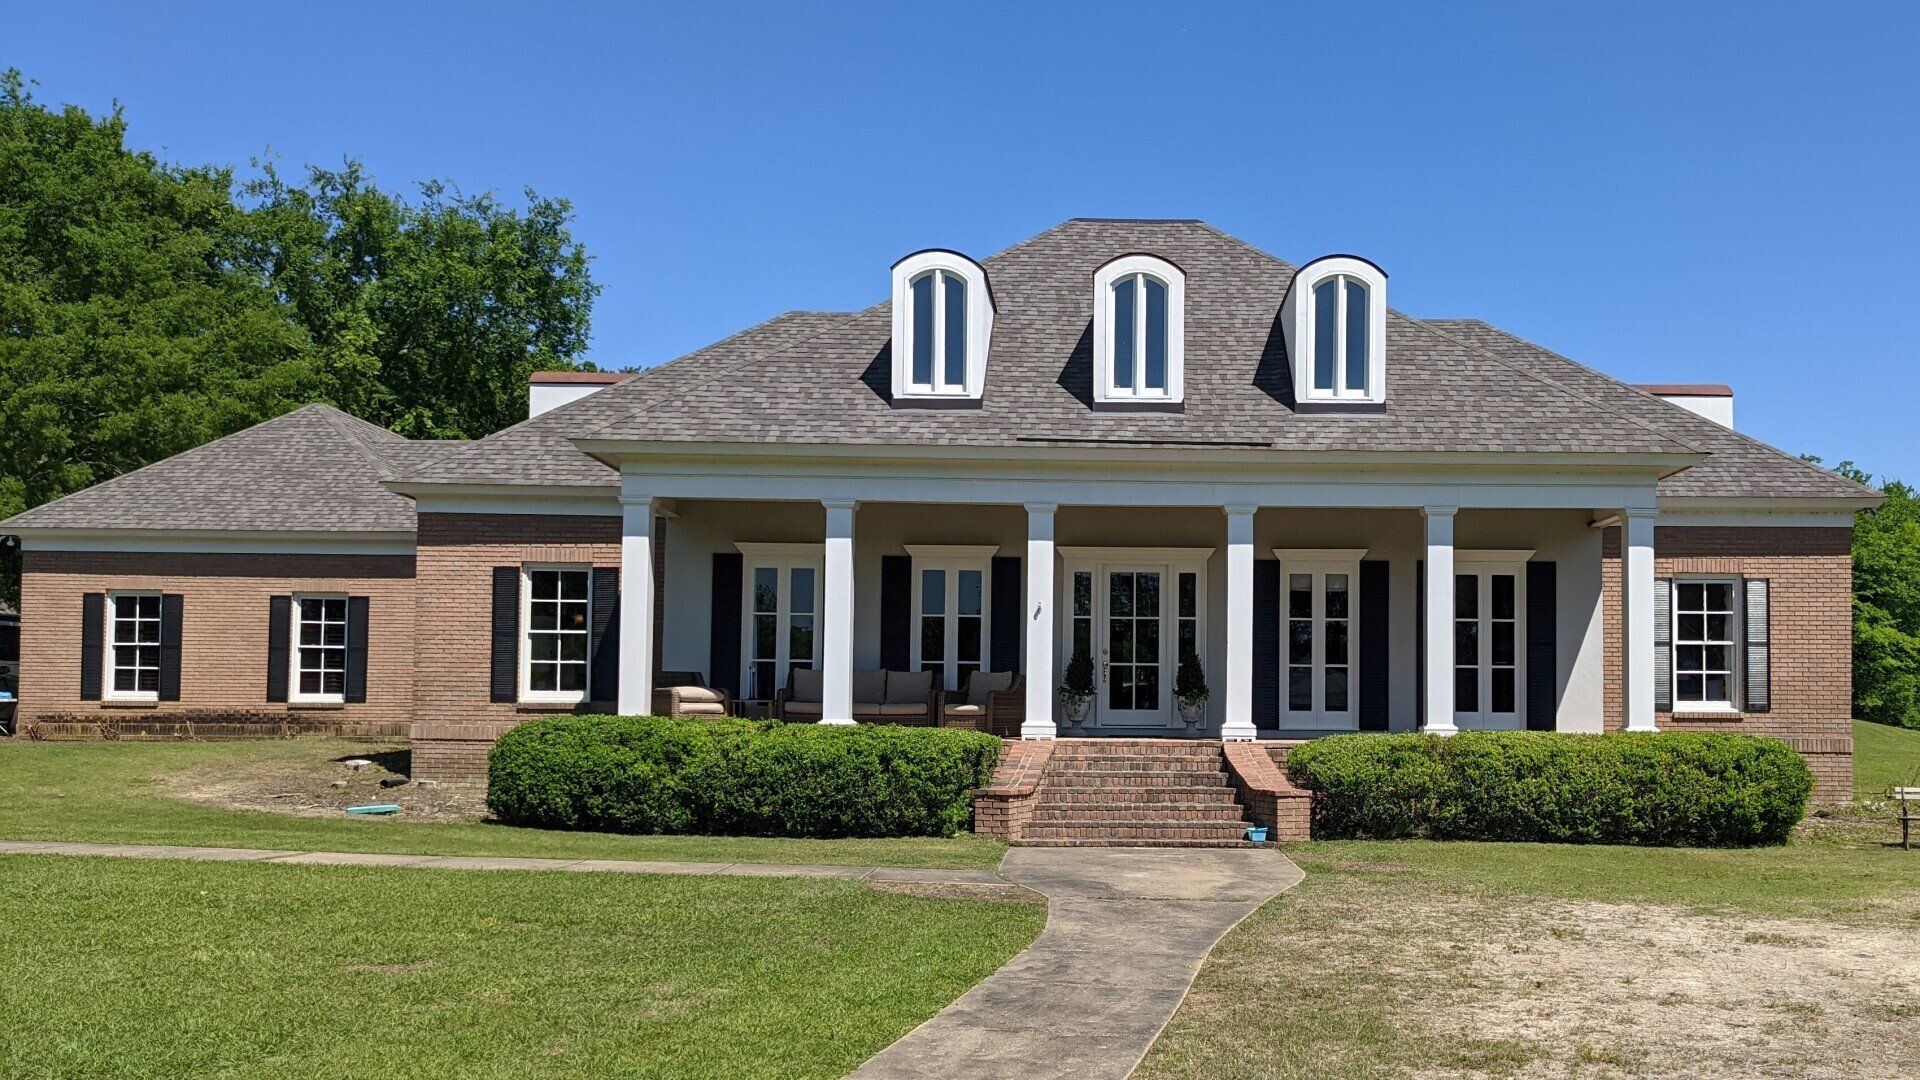 Residential tinting service - Before SPF Tint protected this home from UV-Sun Damage on 4-20-2021 in Montgomery, AL